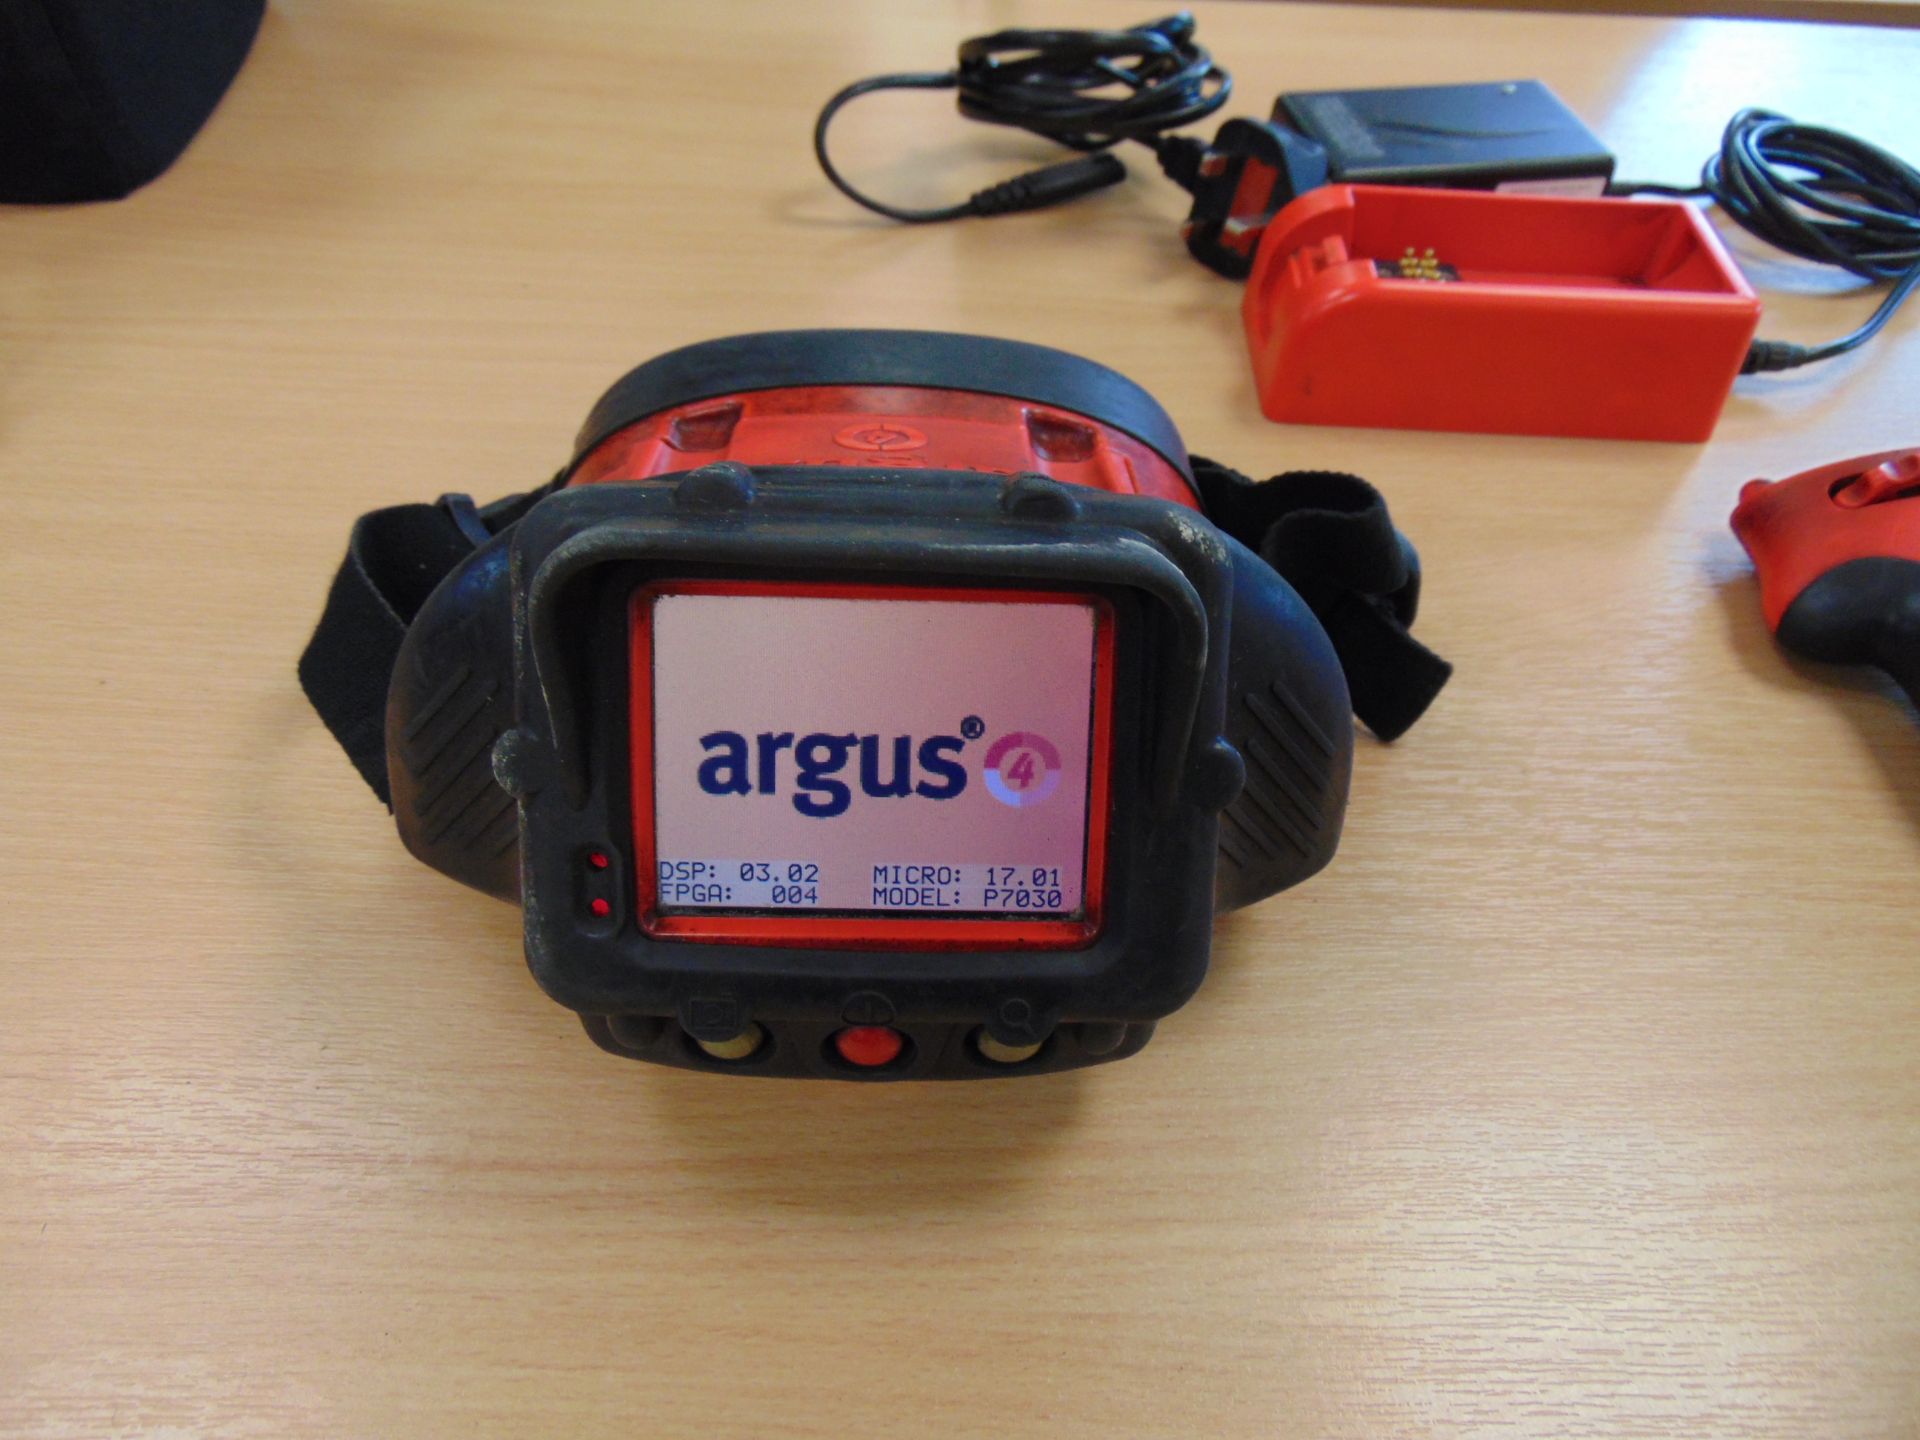 Argus 4 E2V Thermal Imaging Camera & Battery Charger - Image 3 of 11